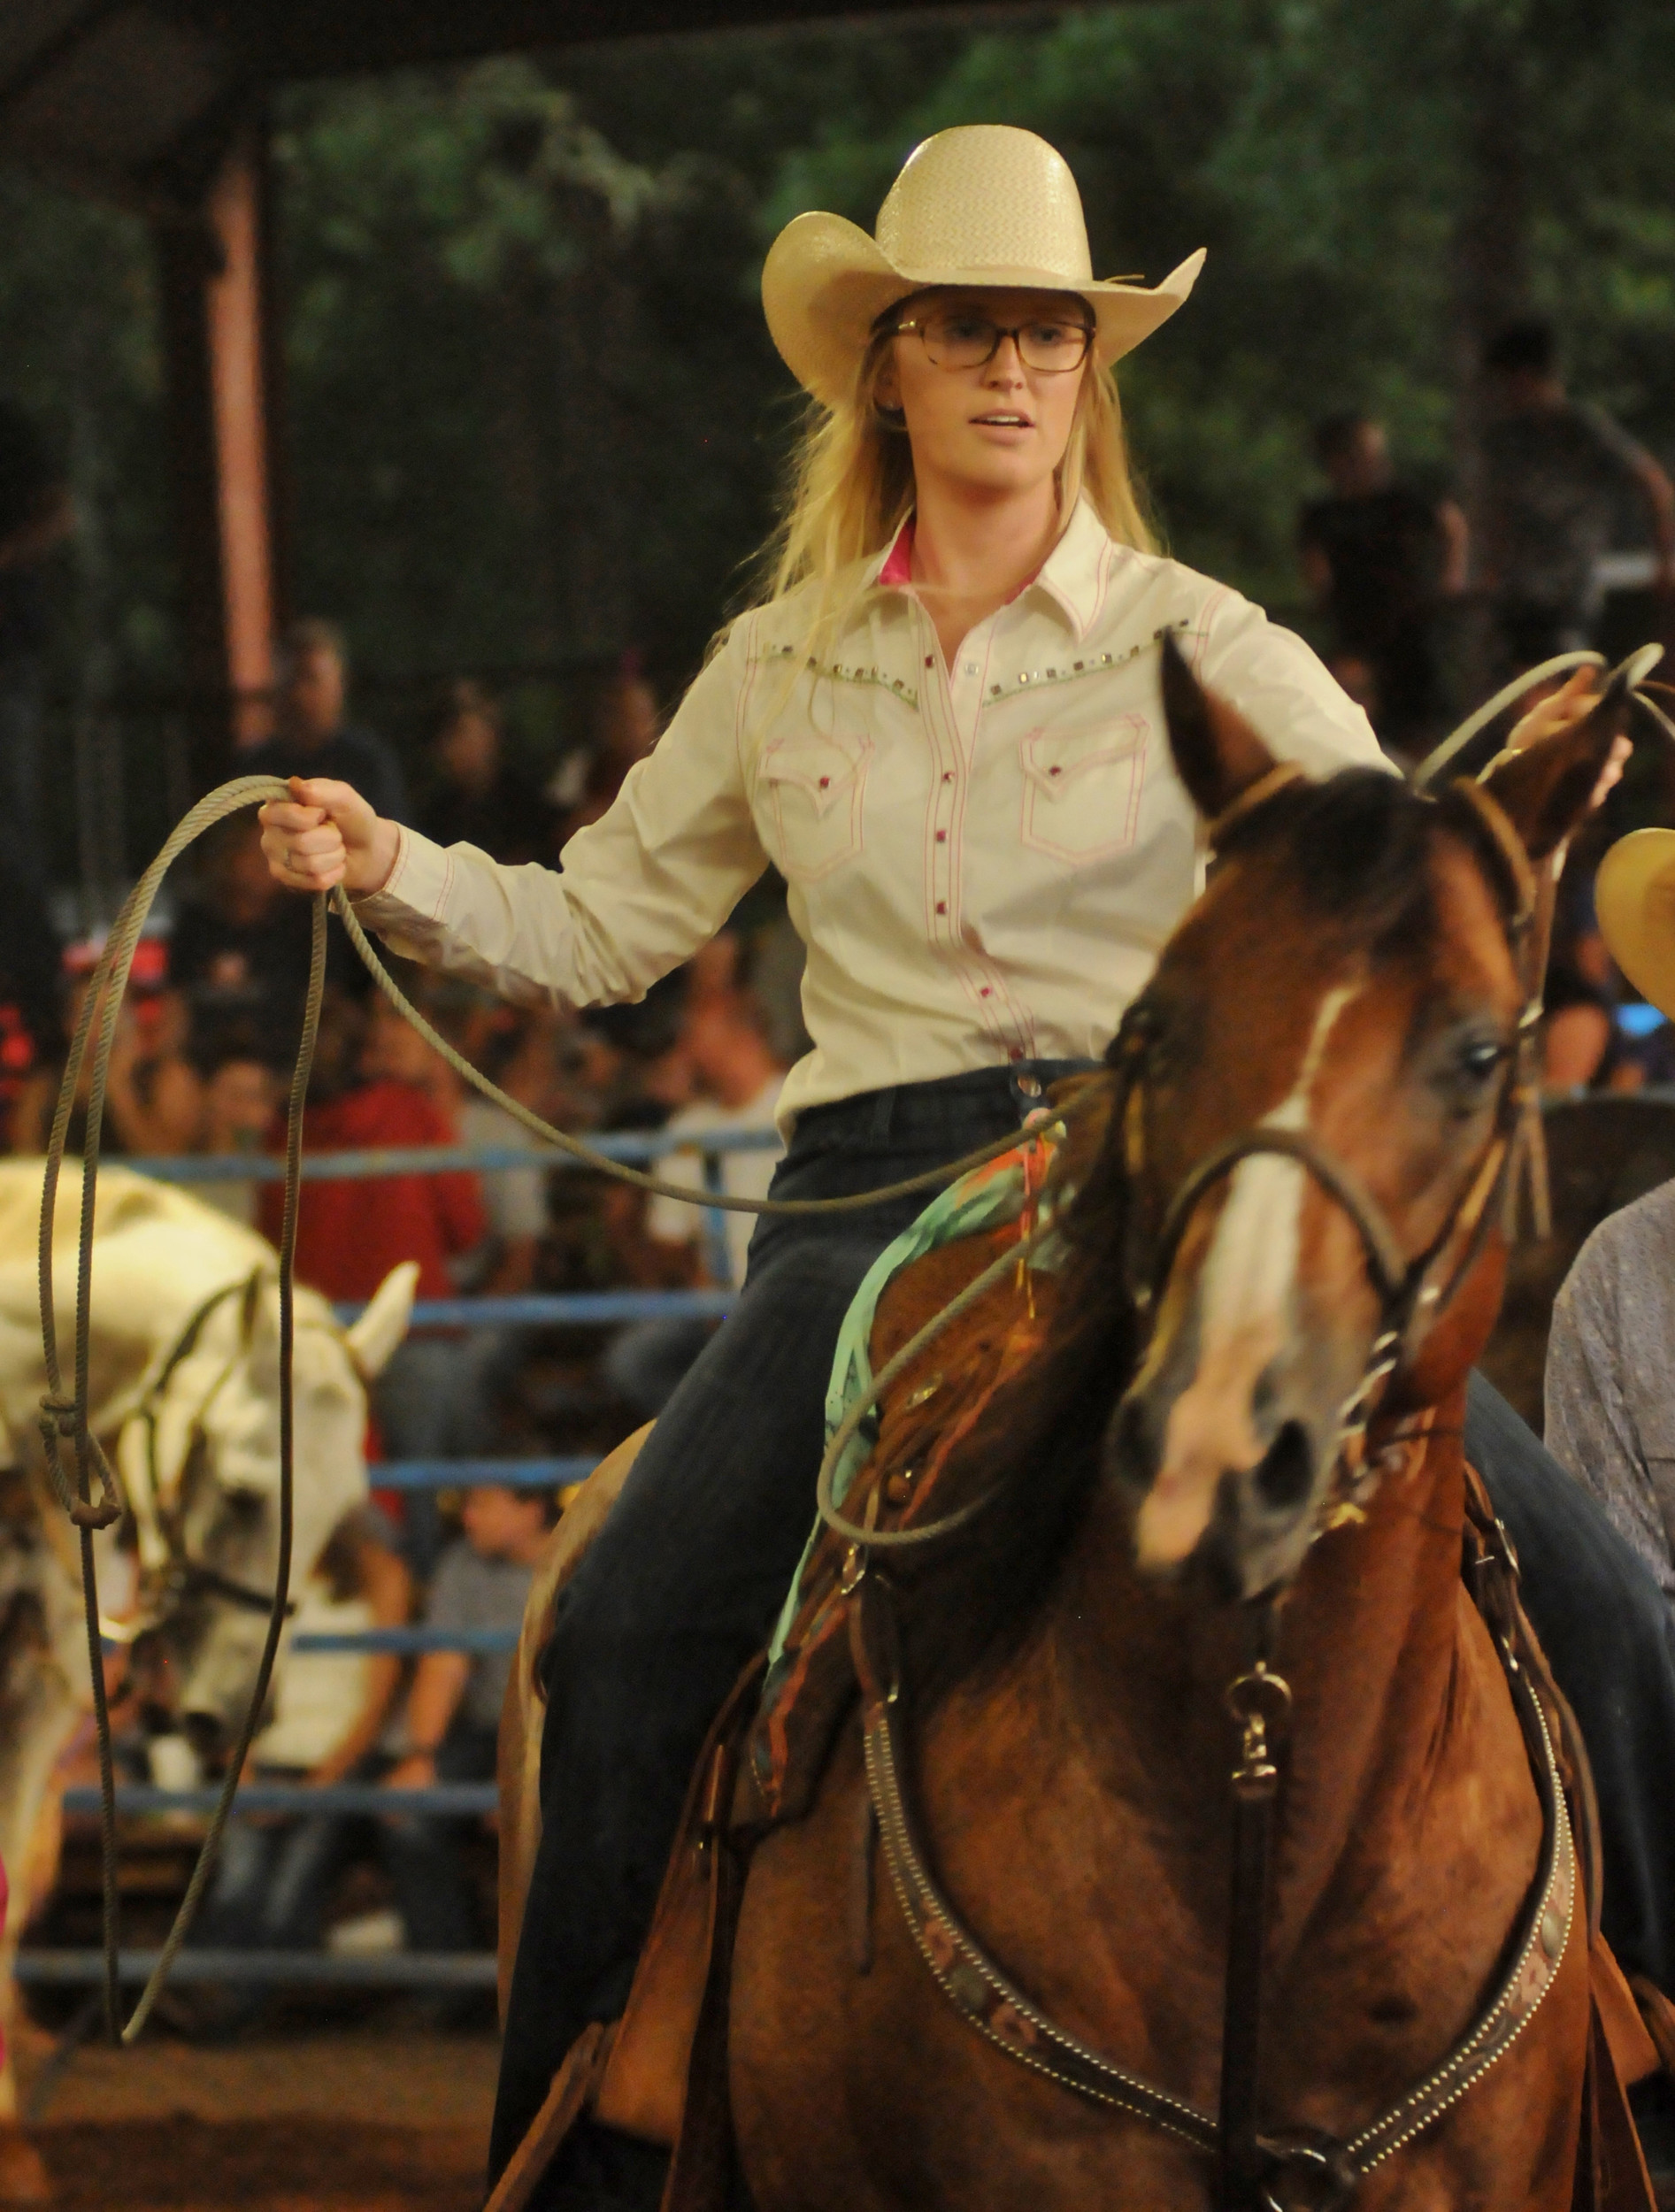 Bartow County Championship Rodeo gallops into Cartersville July 13, 14